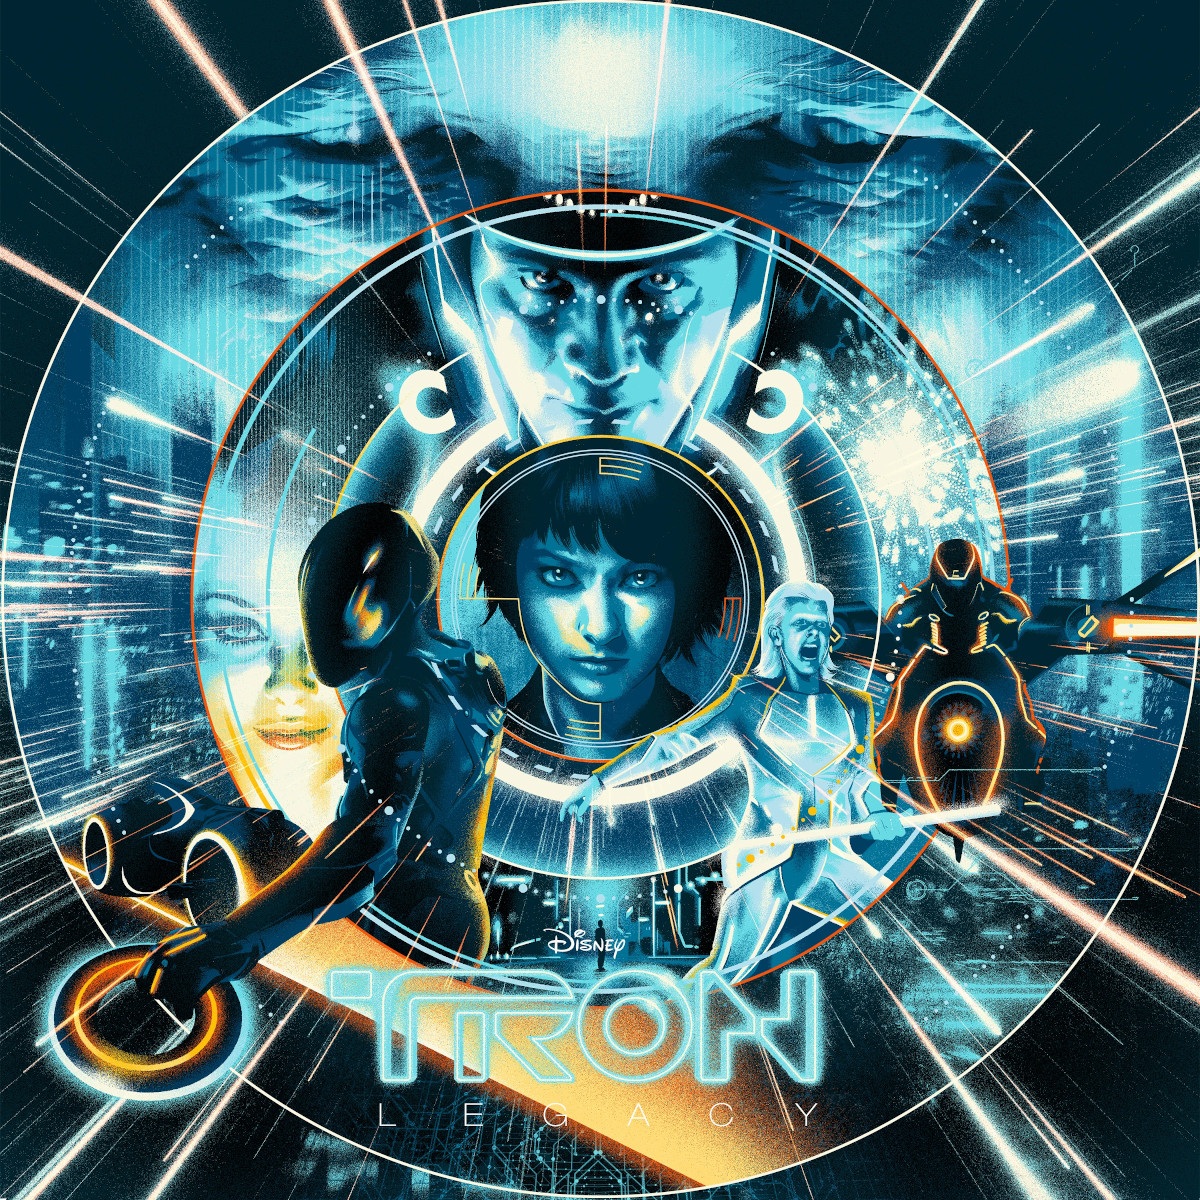 Tron: Legacy Soundtrack Cover